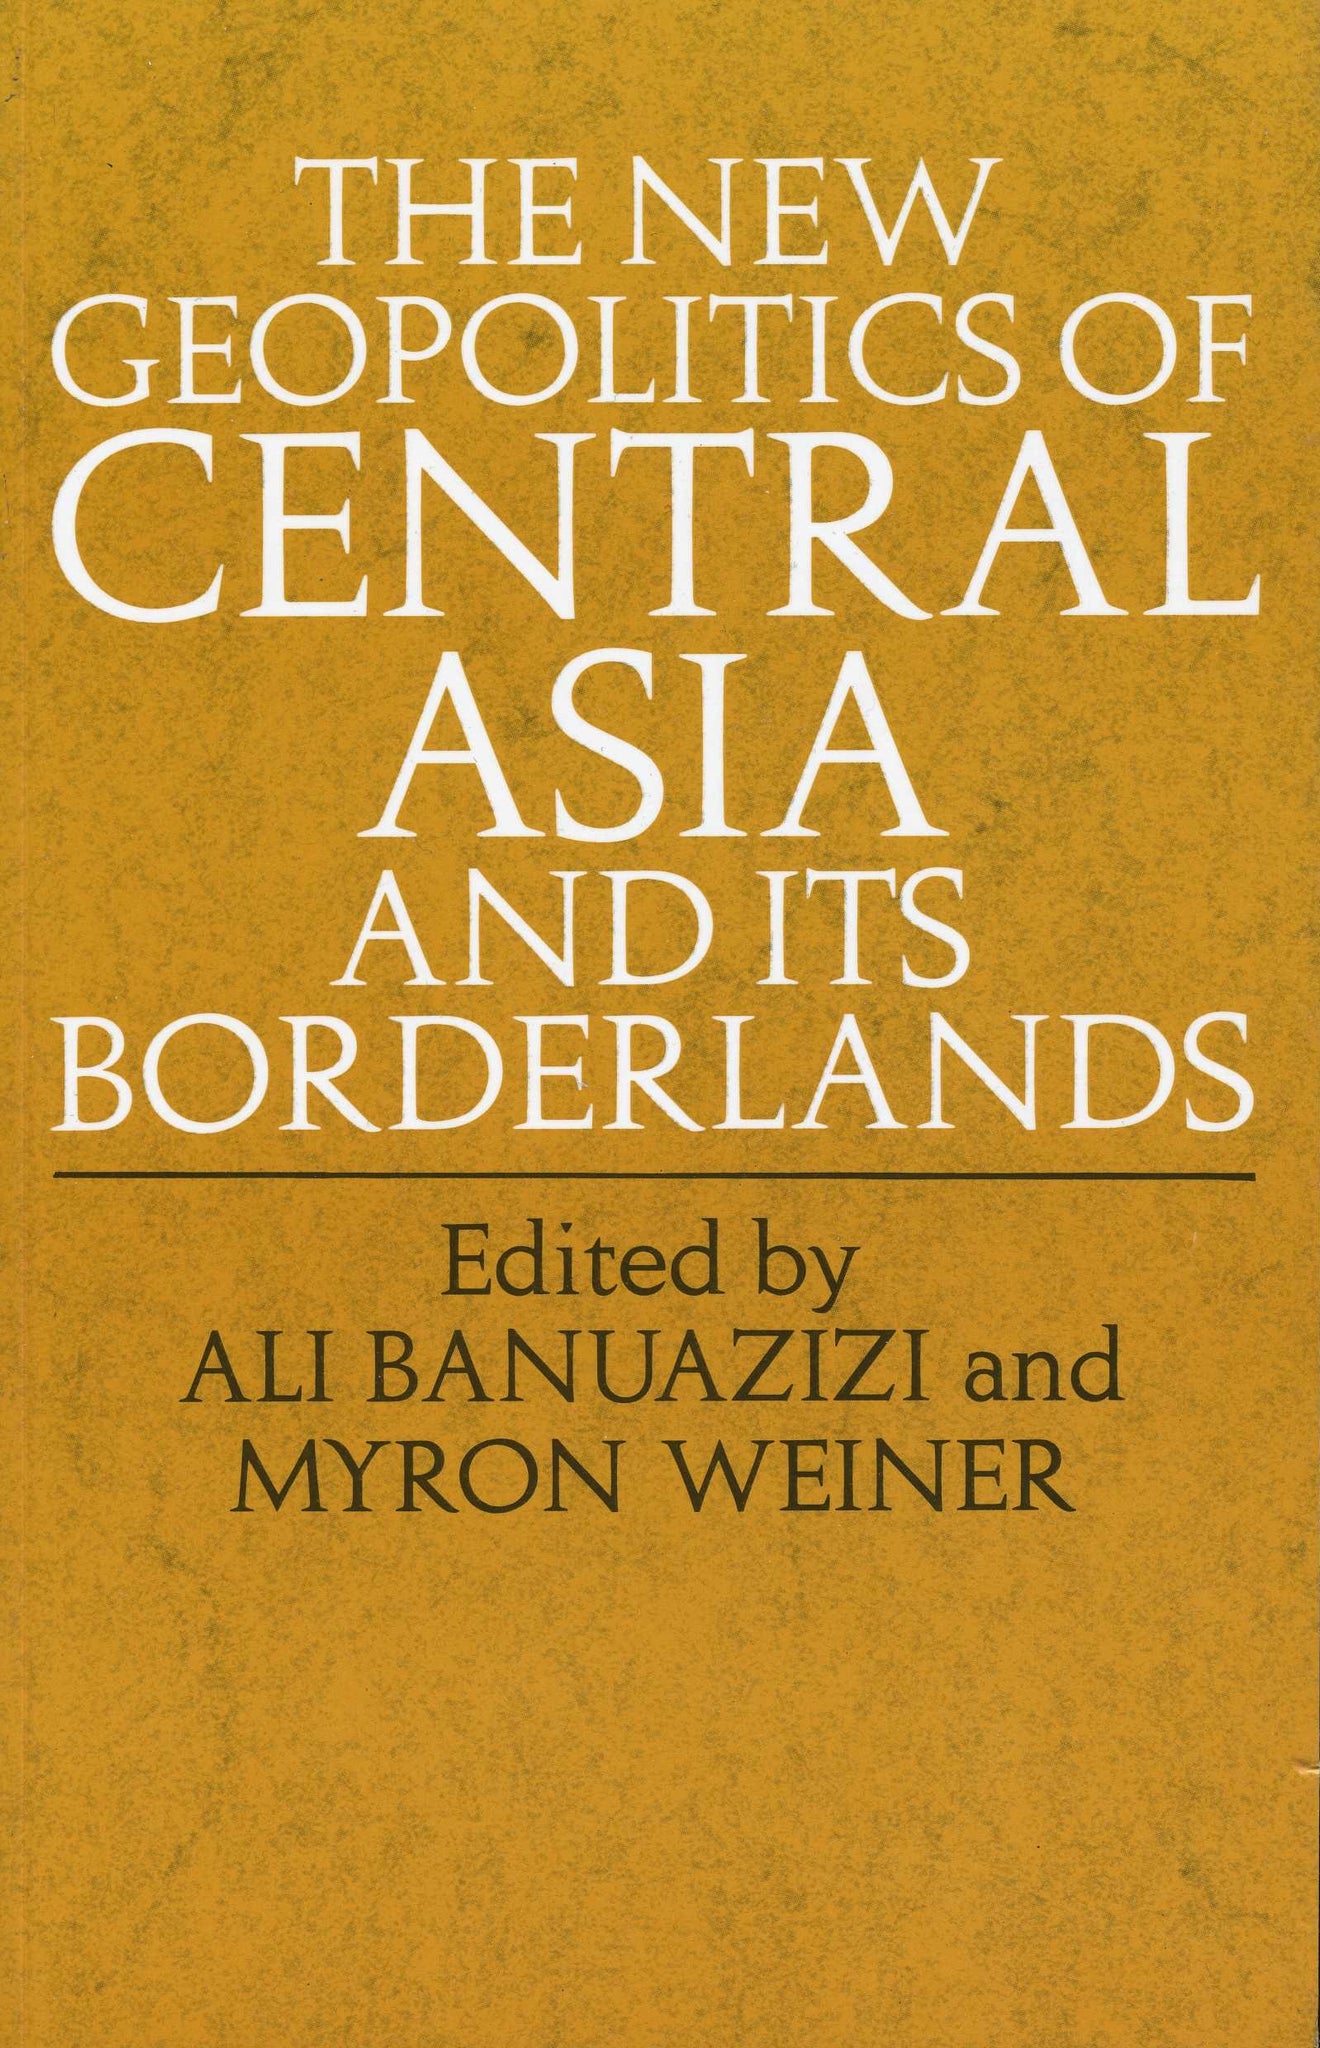 NEW GEOPOLITICS OF CENTRAL ASIA AND ITS BORDERLANDS